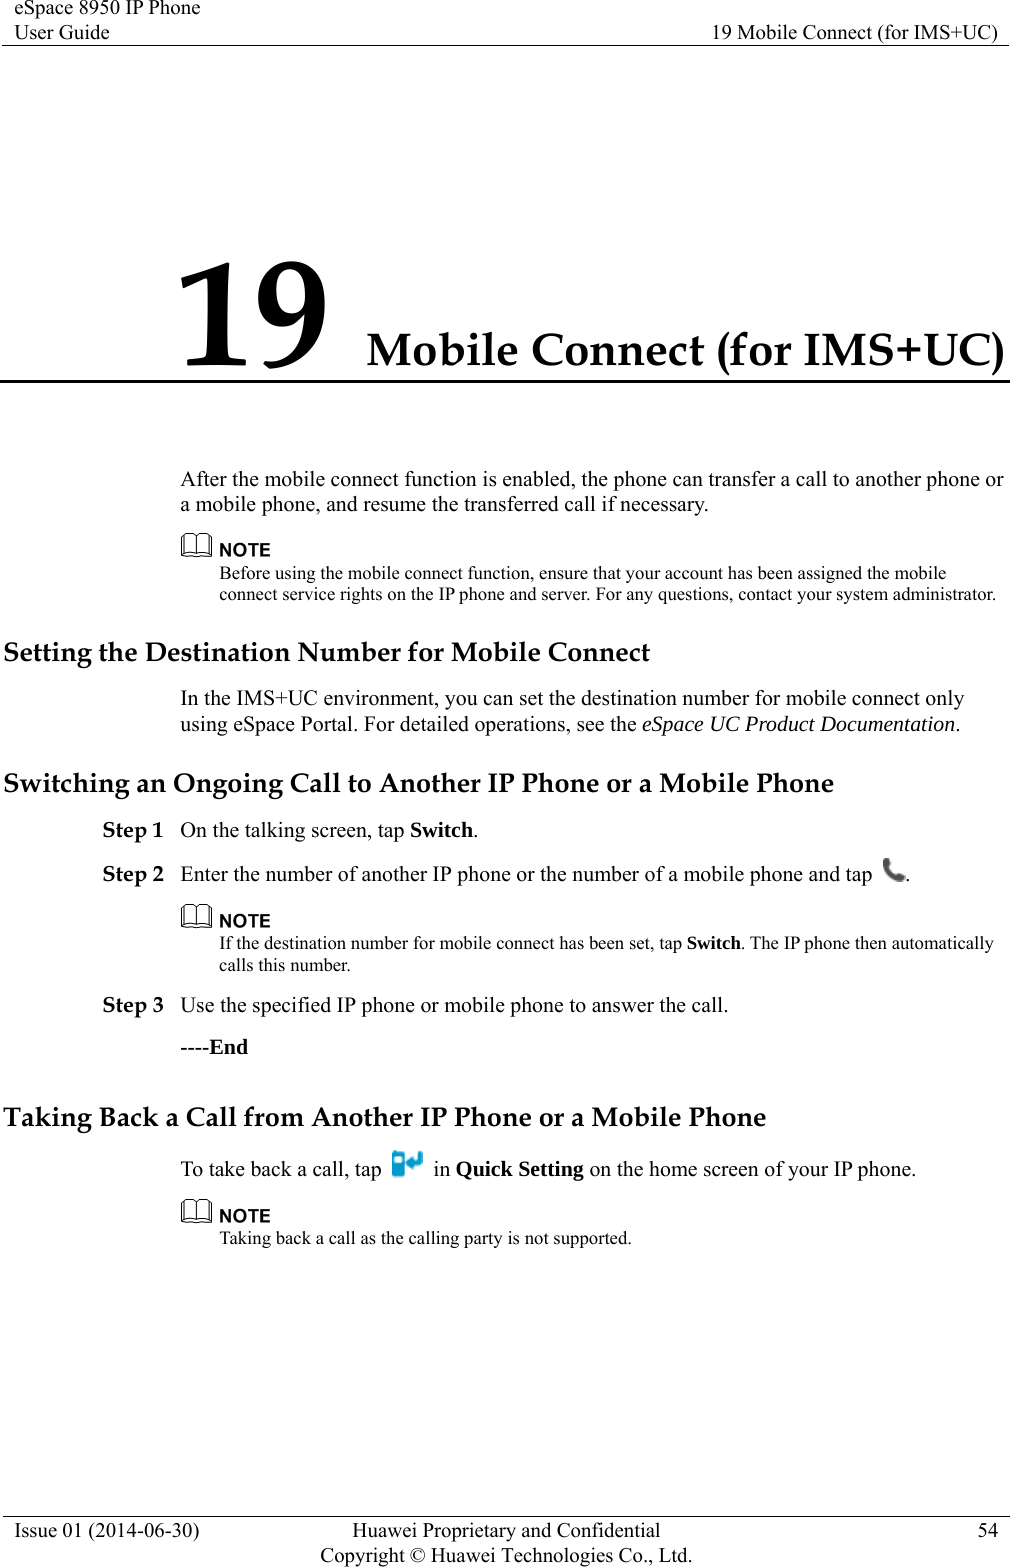 eSpace 8950 IP Phone User Guide  19 Mobile Connect (for IMS+UC) Issue 01 (2014-06-30)  Huawei Proprietary and Confidential         Copyright © Huawei Technologies Co., Ltd.54 19 Mobile Connect (for IMS+UC) After the mobile connect function is enabled, the phone can transfer a call to another phone or a mobile phone, and resume the transferred call if necessary.  Before using the mobile connect function, ensure that your account has been assigned the mobile connect service rights on the IP phone and server. For any questions, contact your system administrator. Setting the Destination Number for Mobile Connect In the IMS+UC environment, you can set the destination number for mobile connect only using eSpace Portal. For detailed operations, see the eSpace UC Product Documentation. Switching an Ongoing Call to Another IP Phone or a Mobile Phone Step 1 On the talking screen, tap Switch. Step 2 Enter the number of another IP phone or the number of a mobile phone and tap  .  If the destination number for mobile connect has been set, tap Switch. The IP phone then automatically calls this number. Step 3 Use the specified IP phone or mobile phone to answer the call. ----End Taking Back a Call from Another IP Phone or a Mobile Phone To take back a call, tap   in Quick Setting on the home screen of your IP phone.  Taking back a call as the calling party is not supported. 